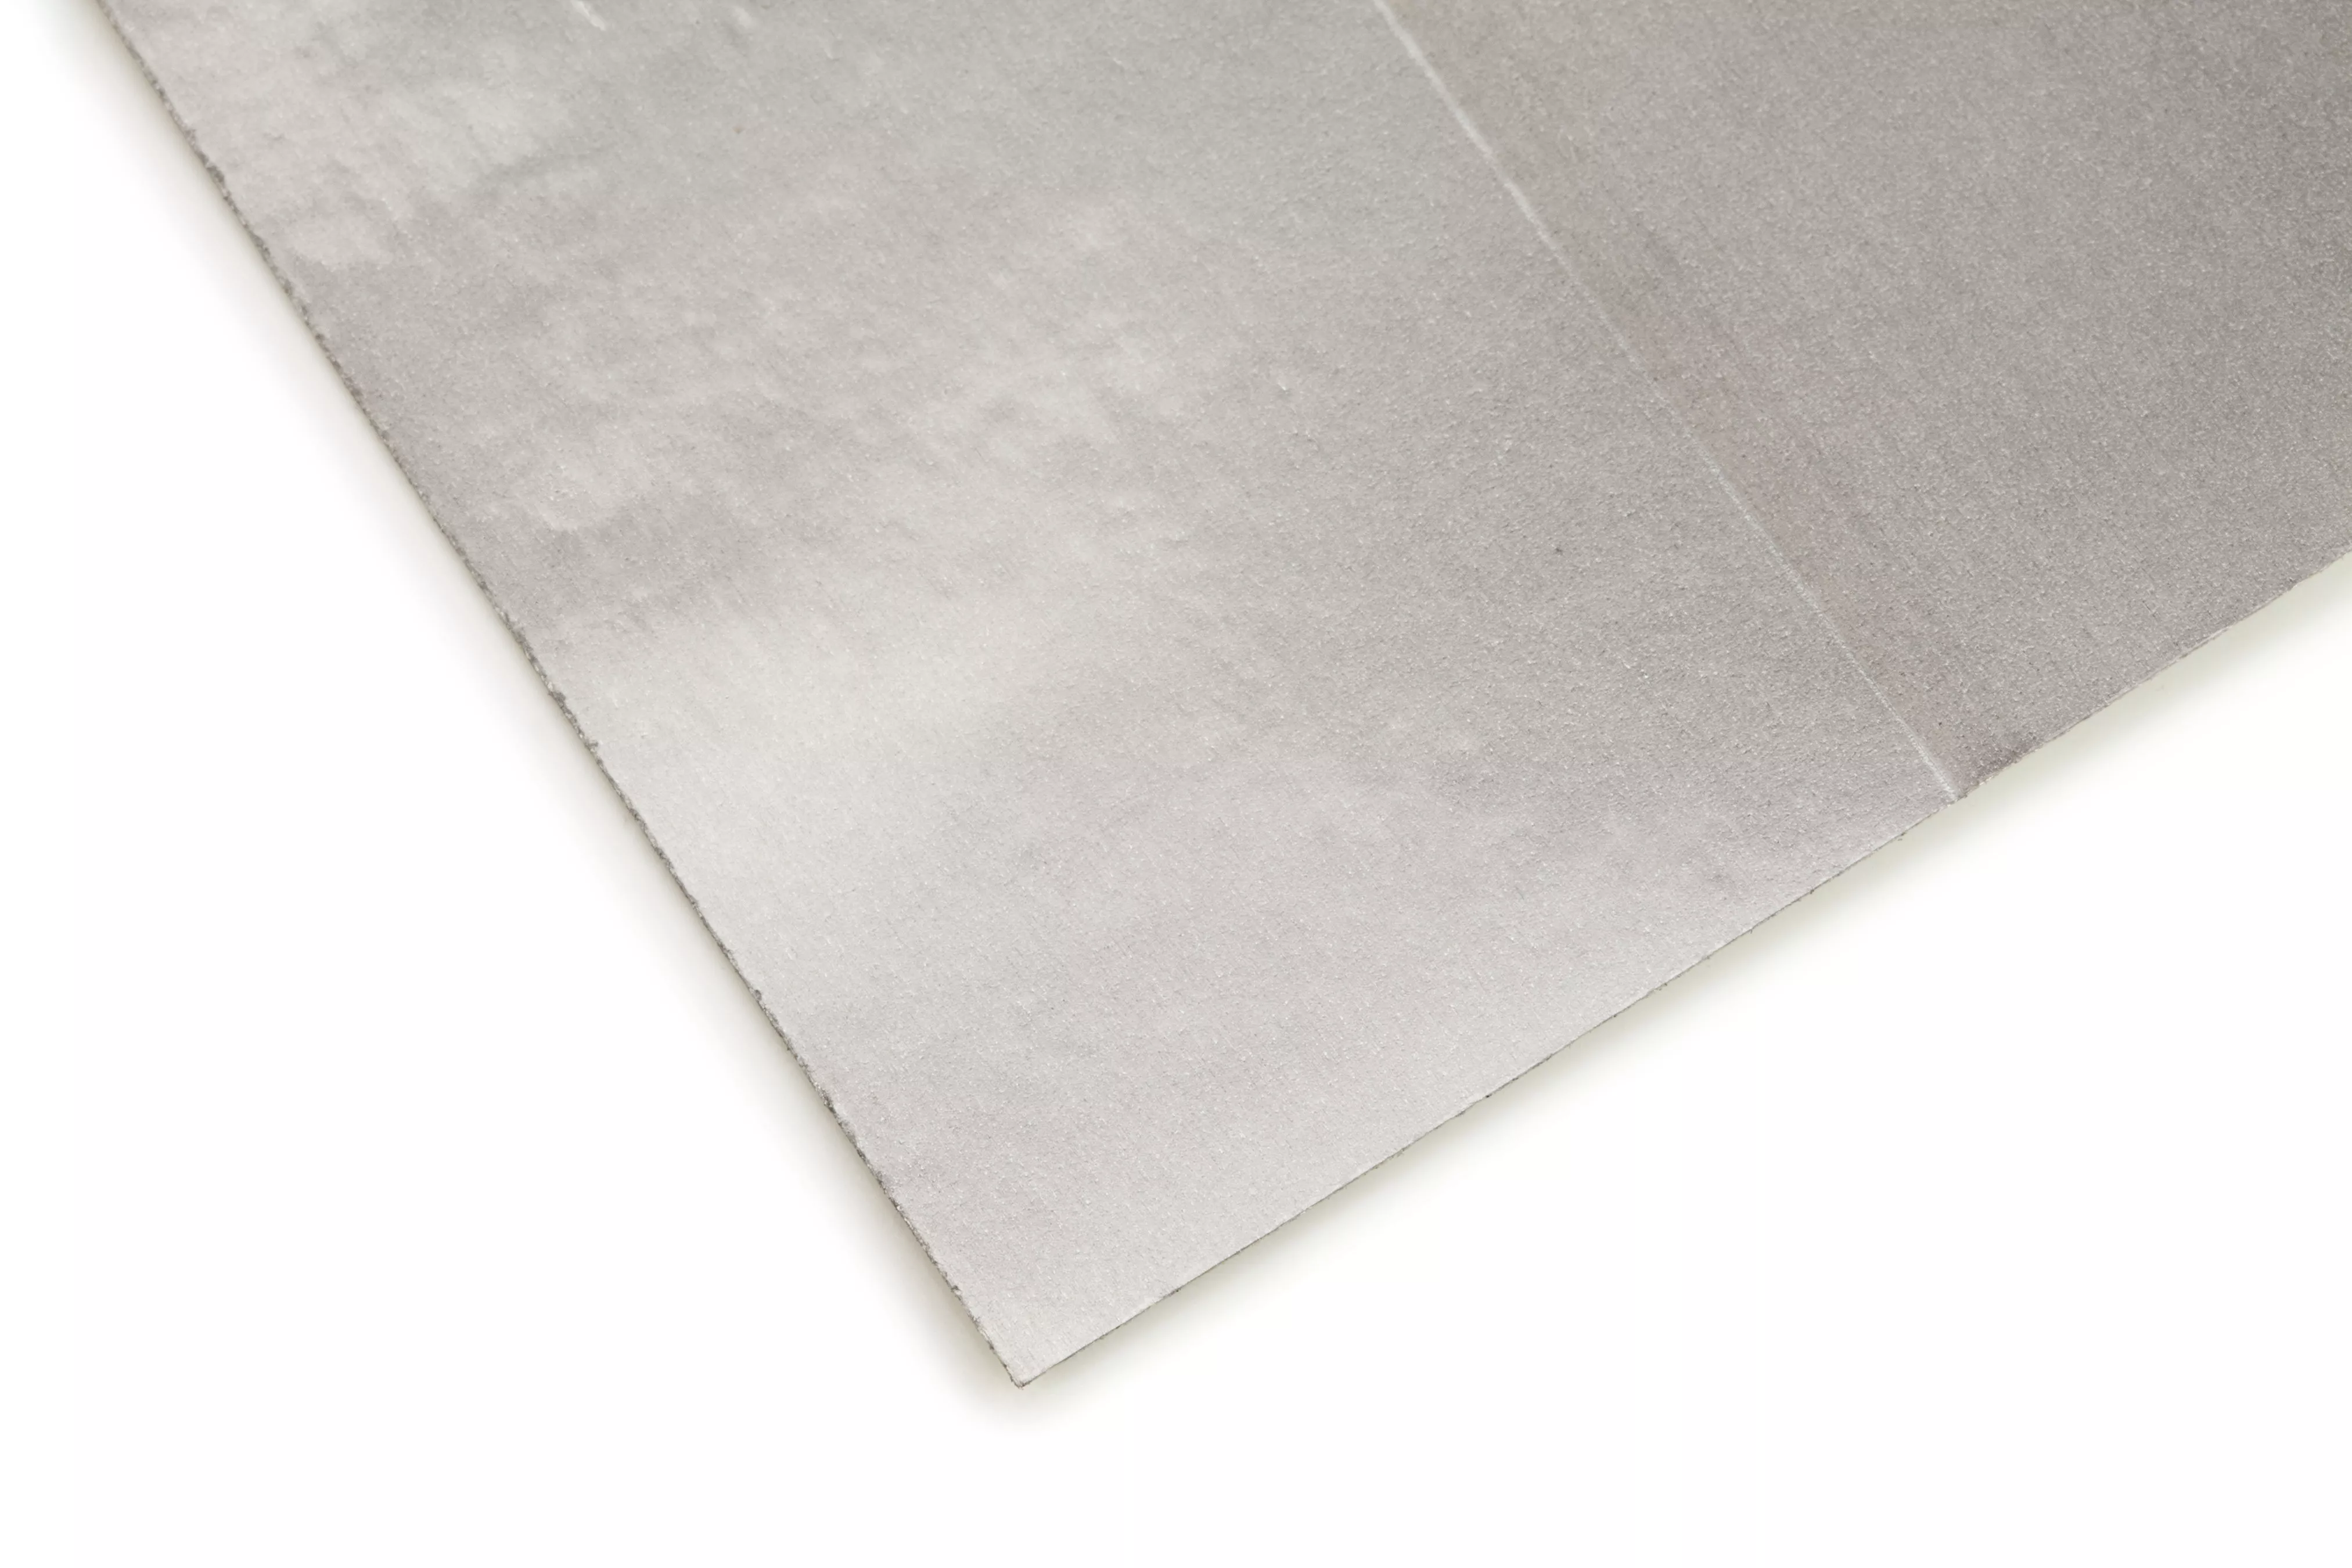 3M™ High Permeability Magnetic Shielding Sheet 1380, 2 in x 8 in, 10
Sheets/Bag